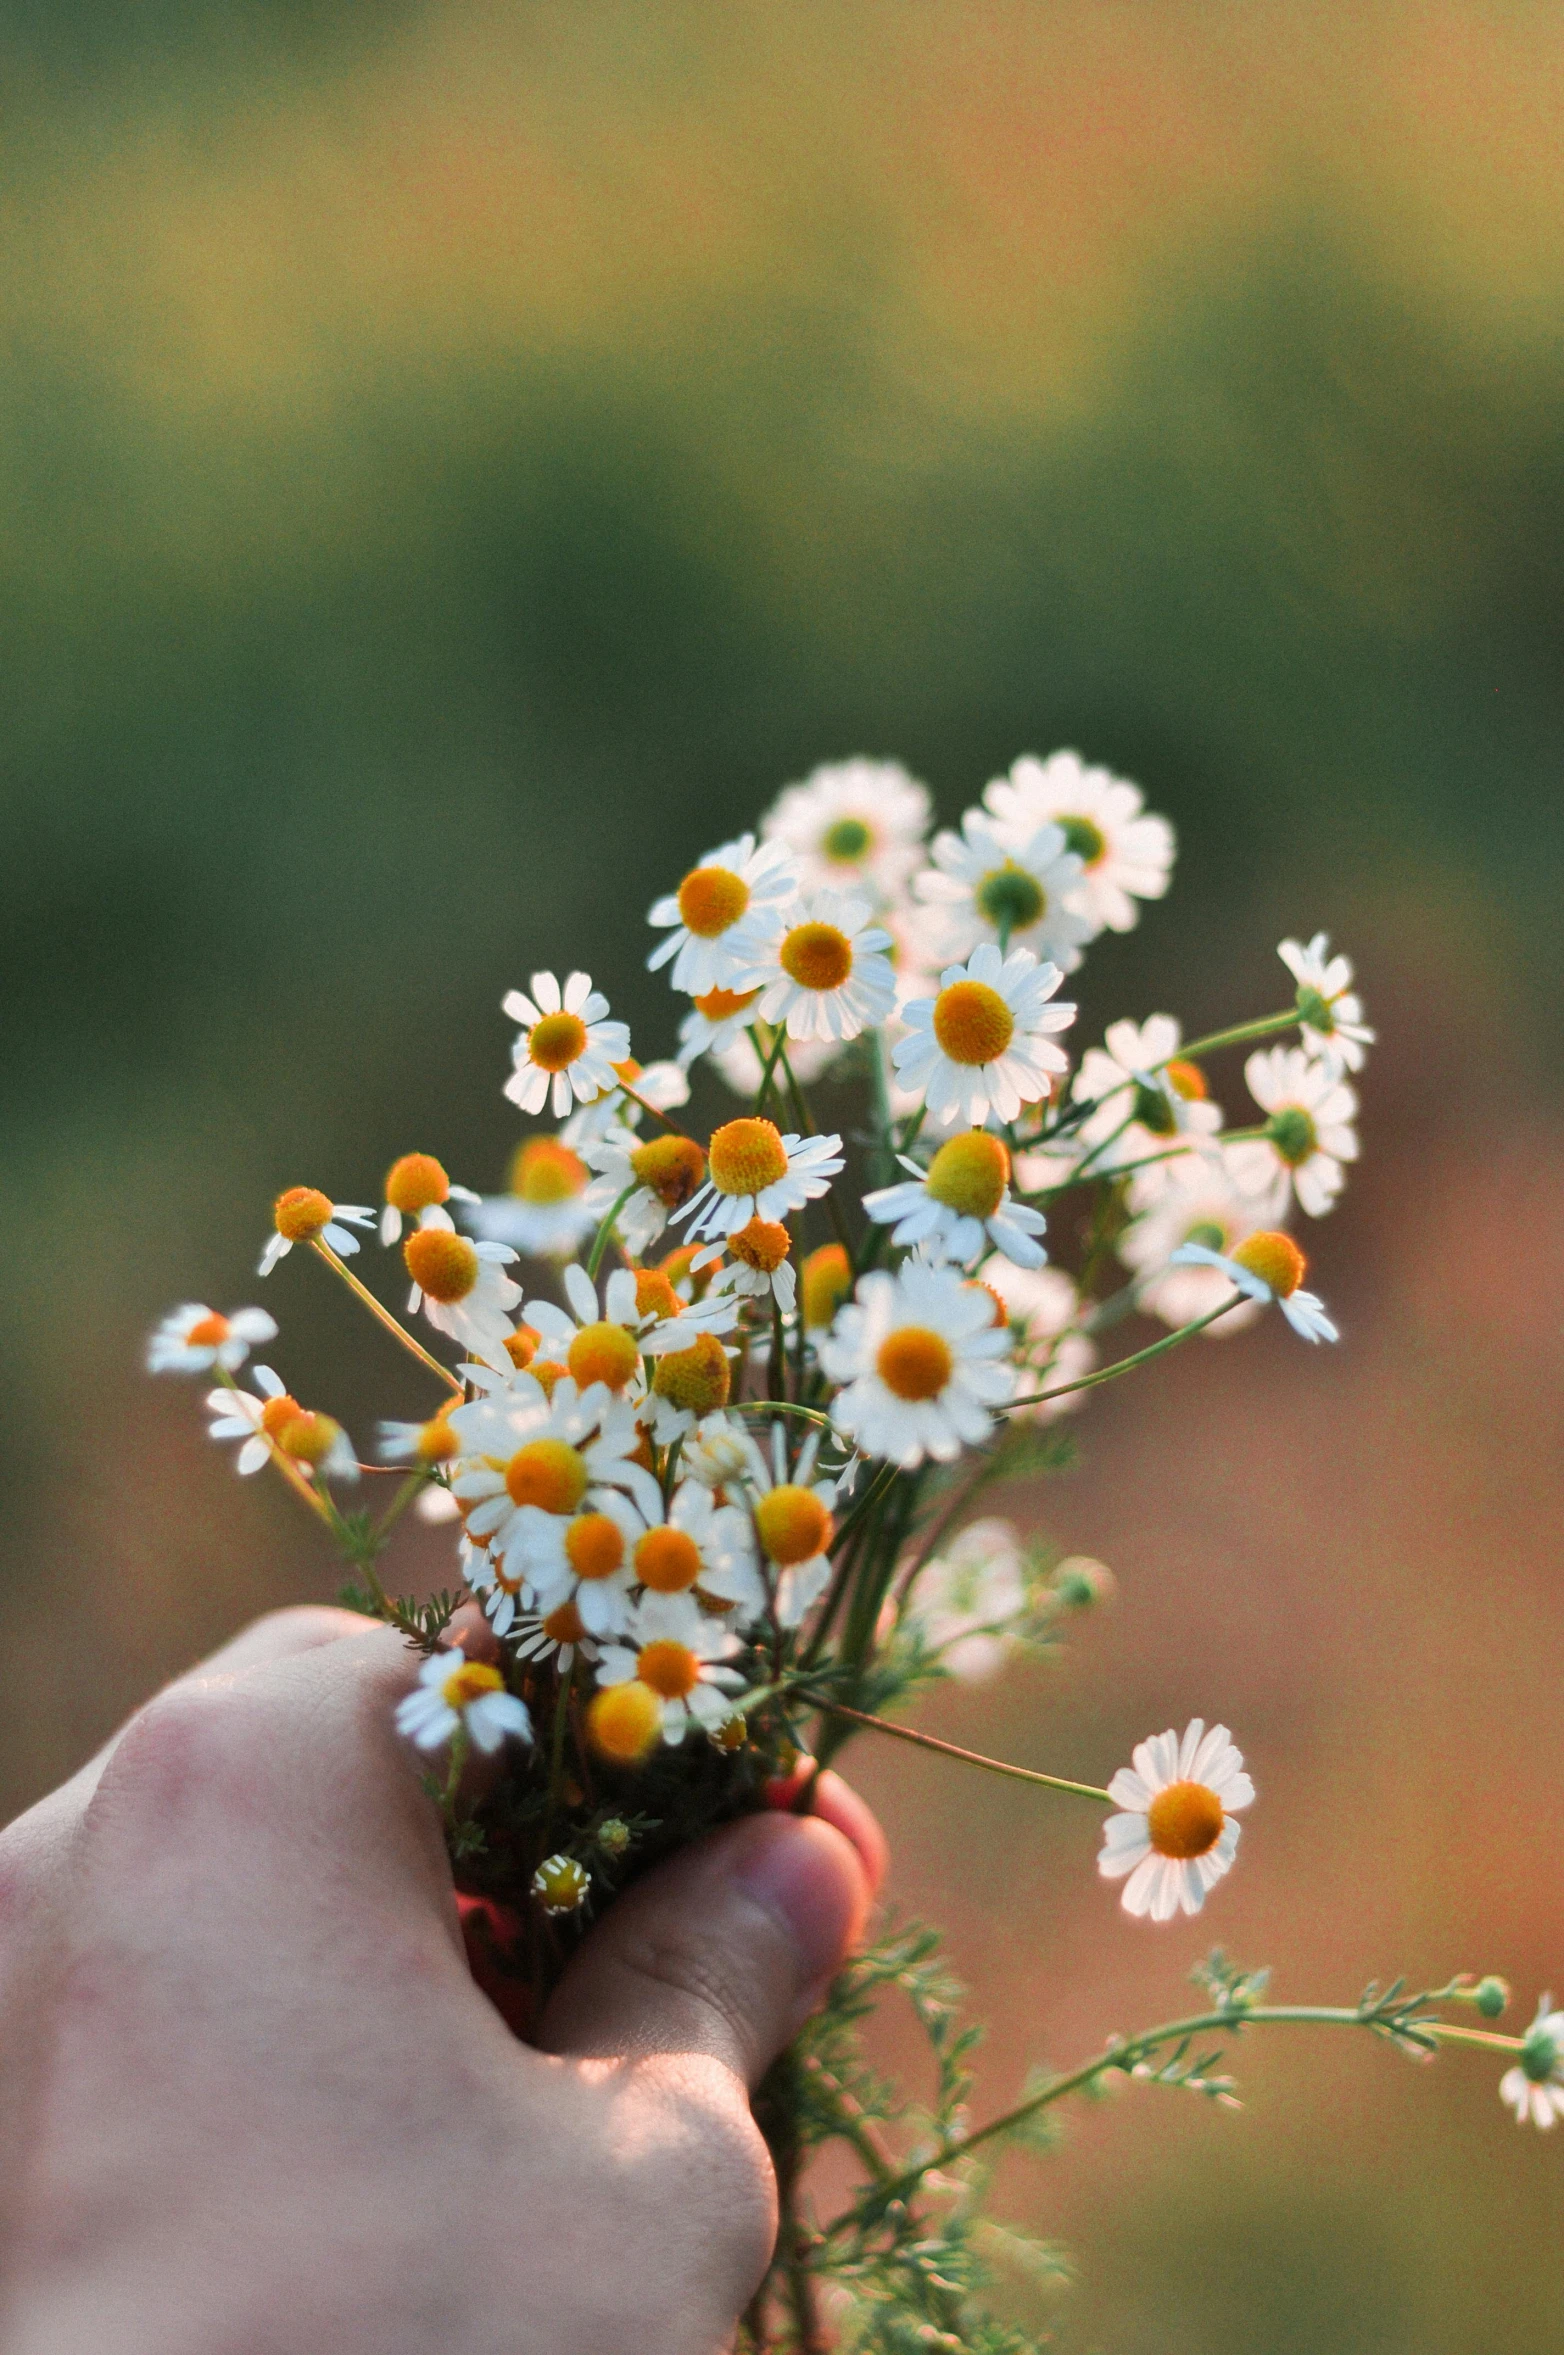 a hand is holding some daisies with small petals